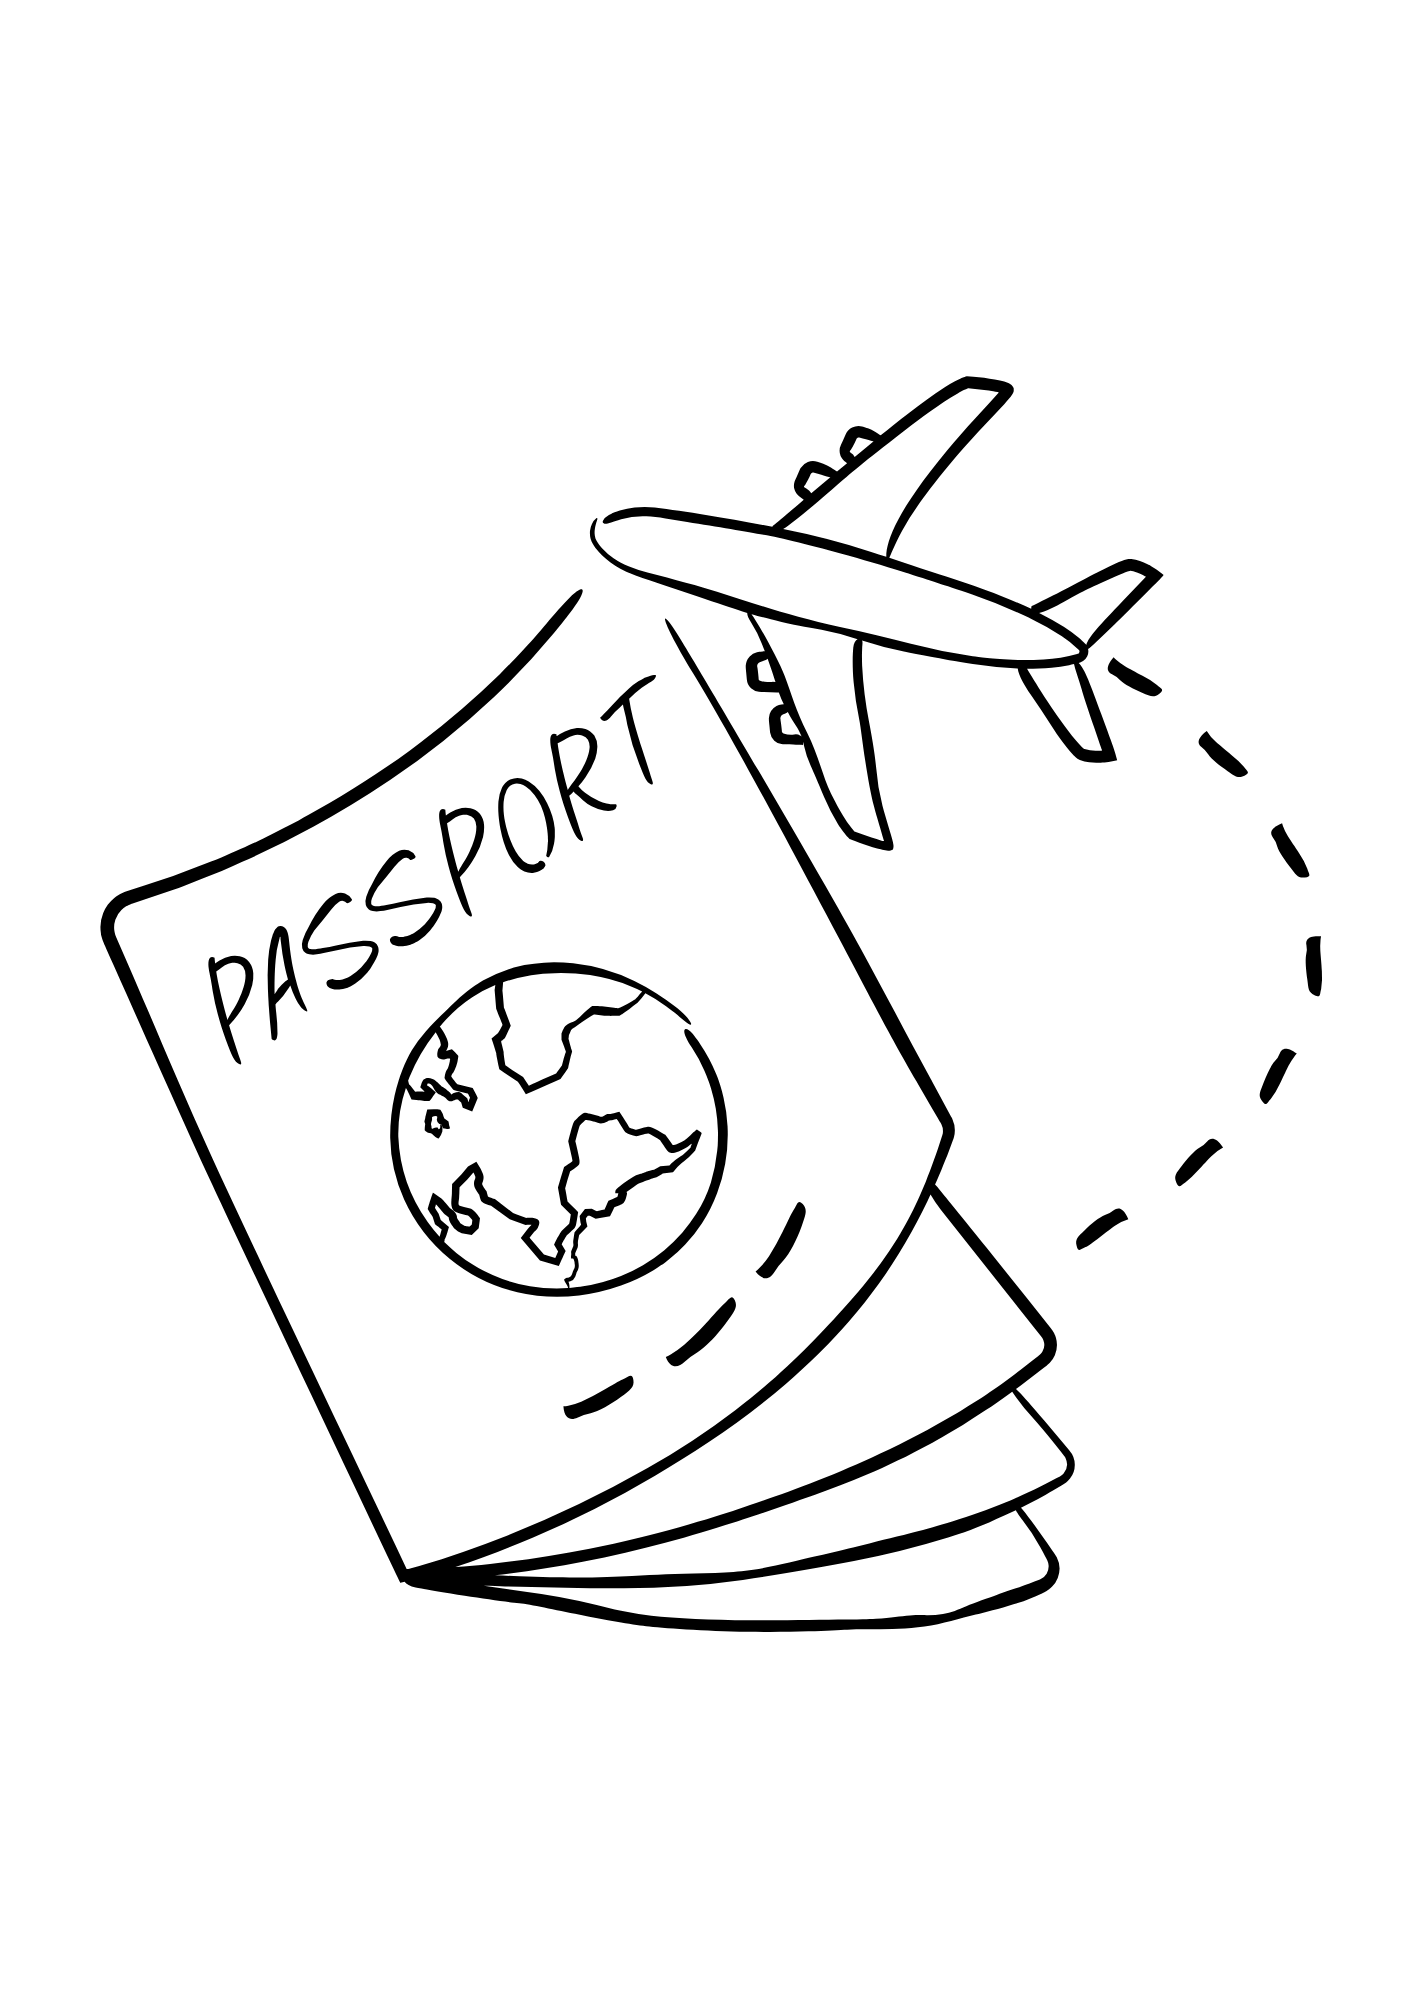 Airplane Passport Coloring Pages